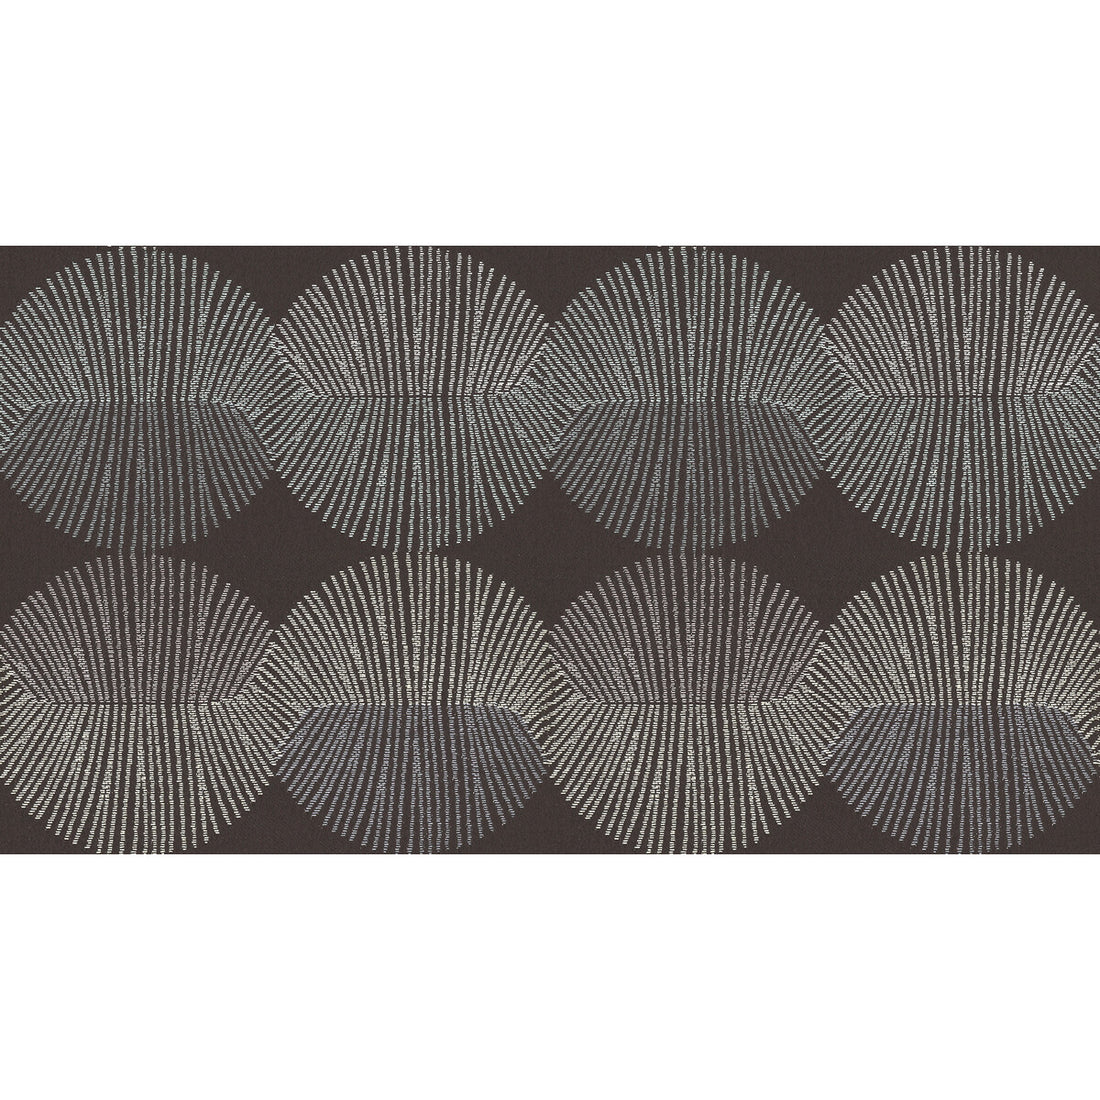 Match Maker fabric in hypnotic color - pattern 34650.35.0 - by Kravet Contract in the Gis collection